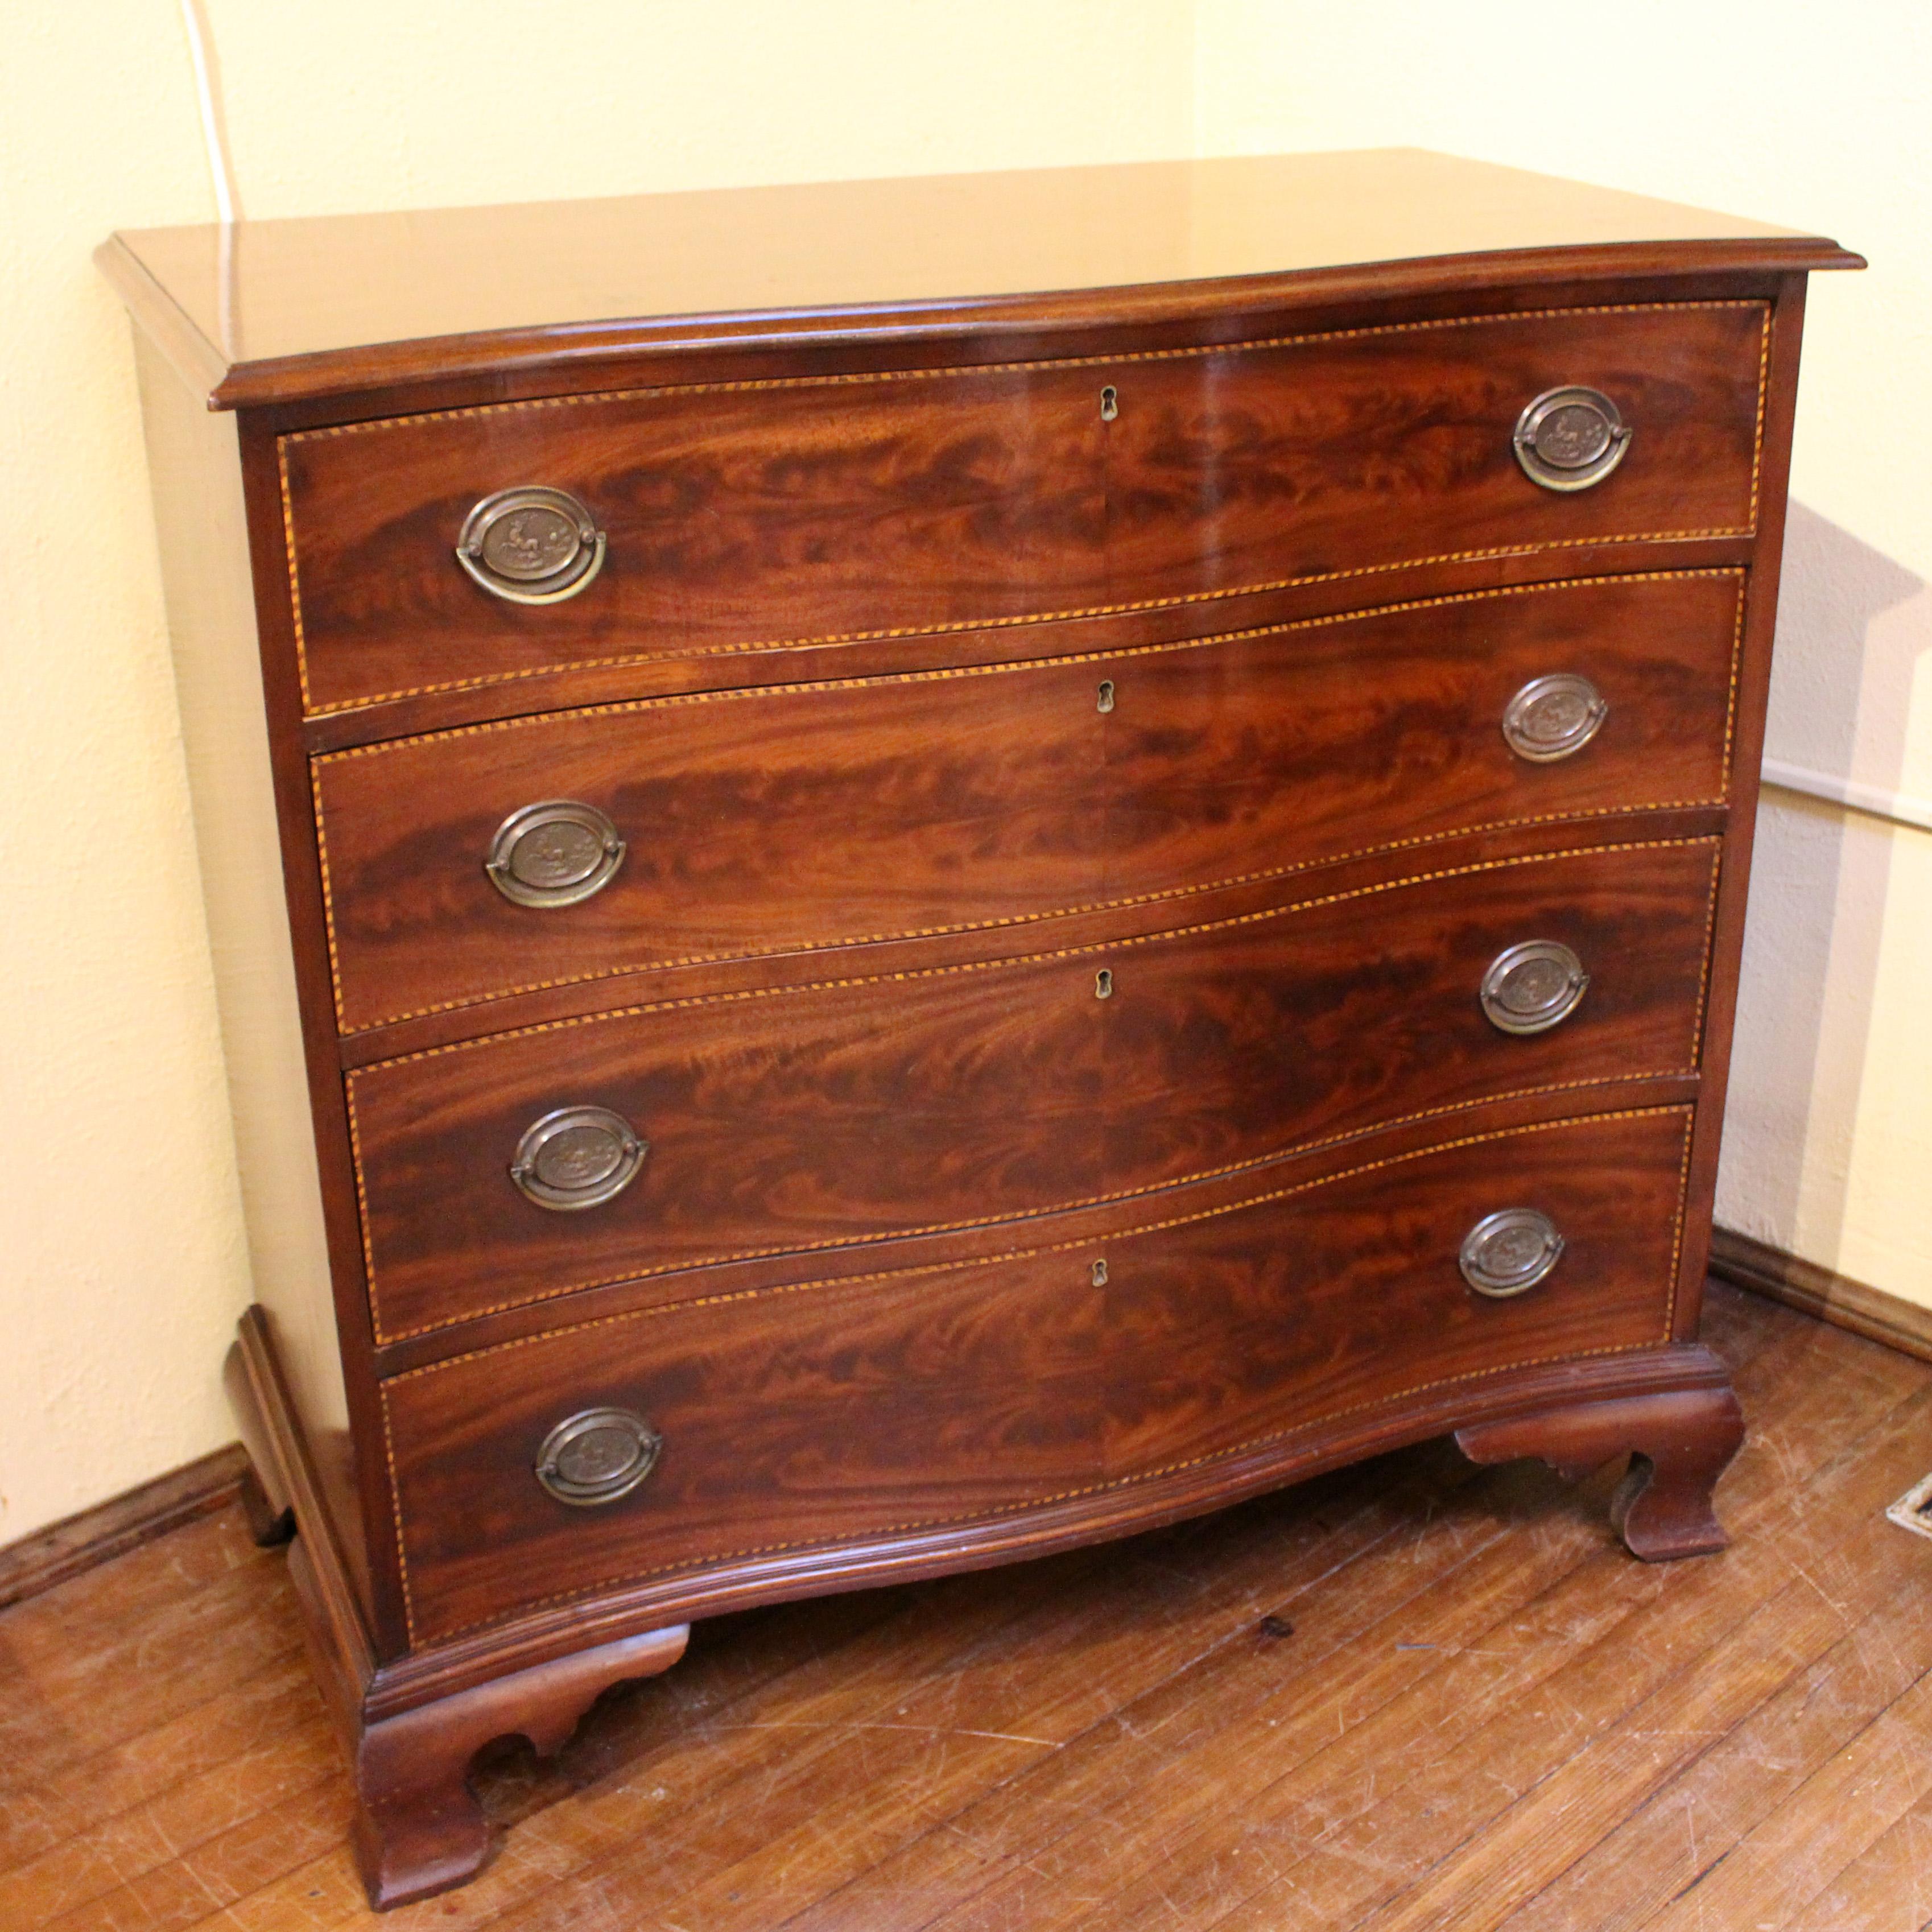 A fine c.1885-1915 bench-made Colonial Revival serpentine chest. American. Solid mahogany with flame veneer on the 4 graduated drawers and barber pole banding. Poplar secondary wood. Several re-built drawer runners.
Measures: 39 1/4